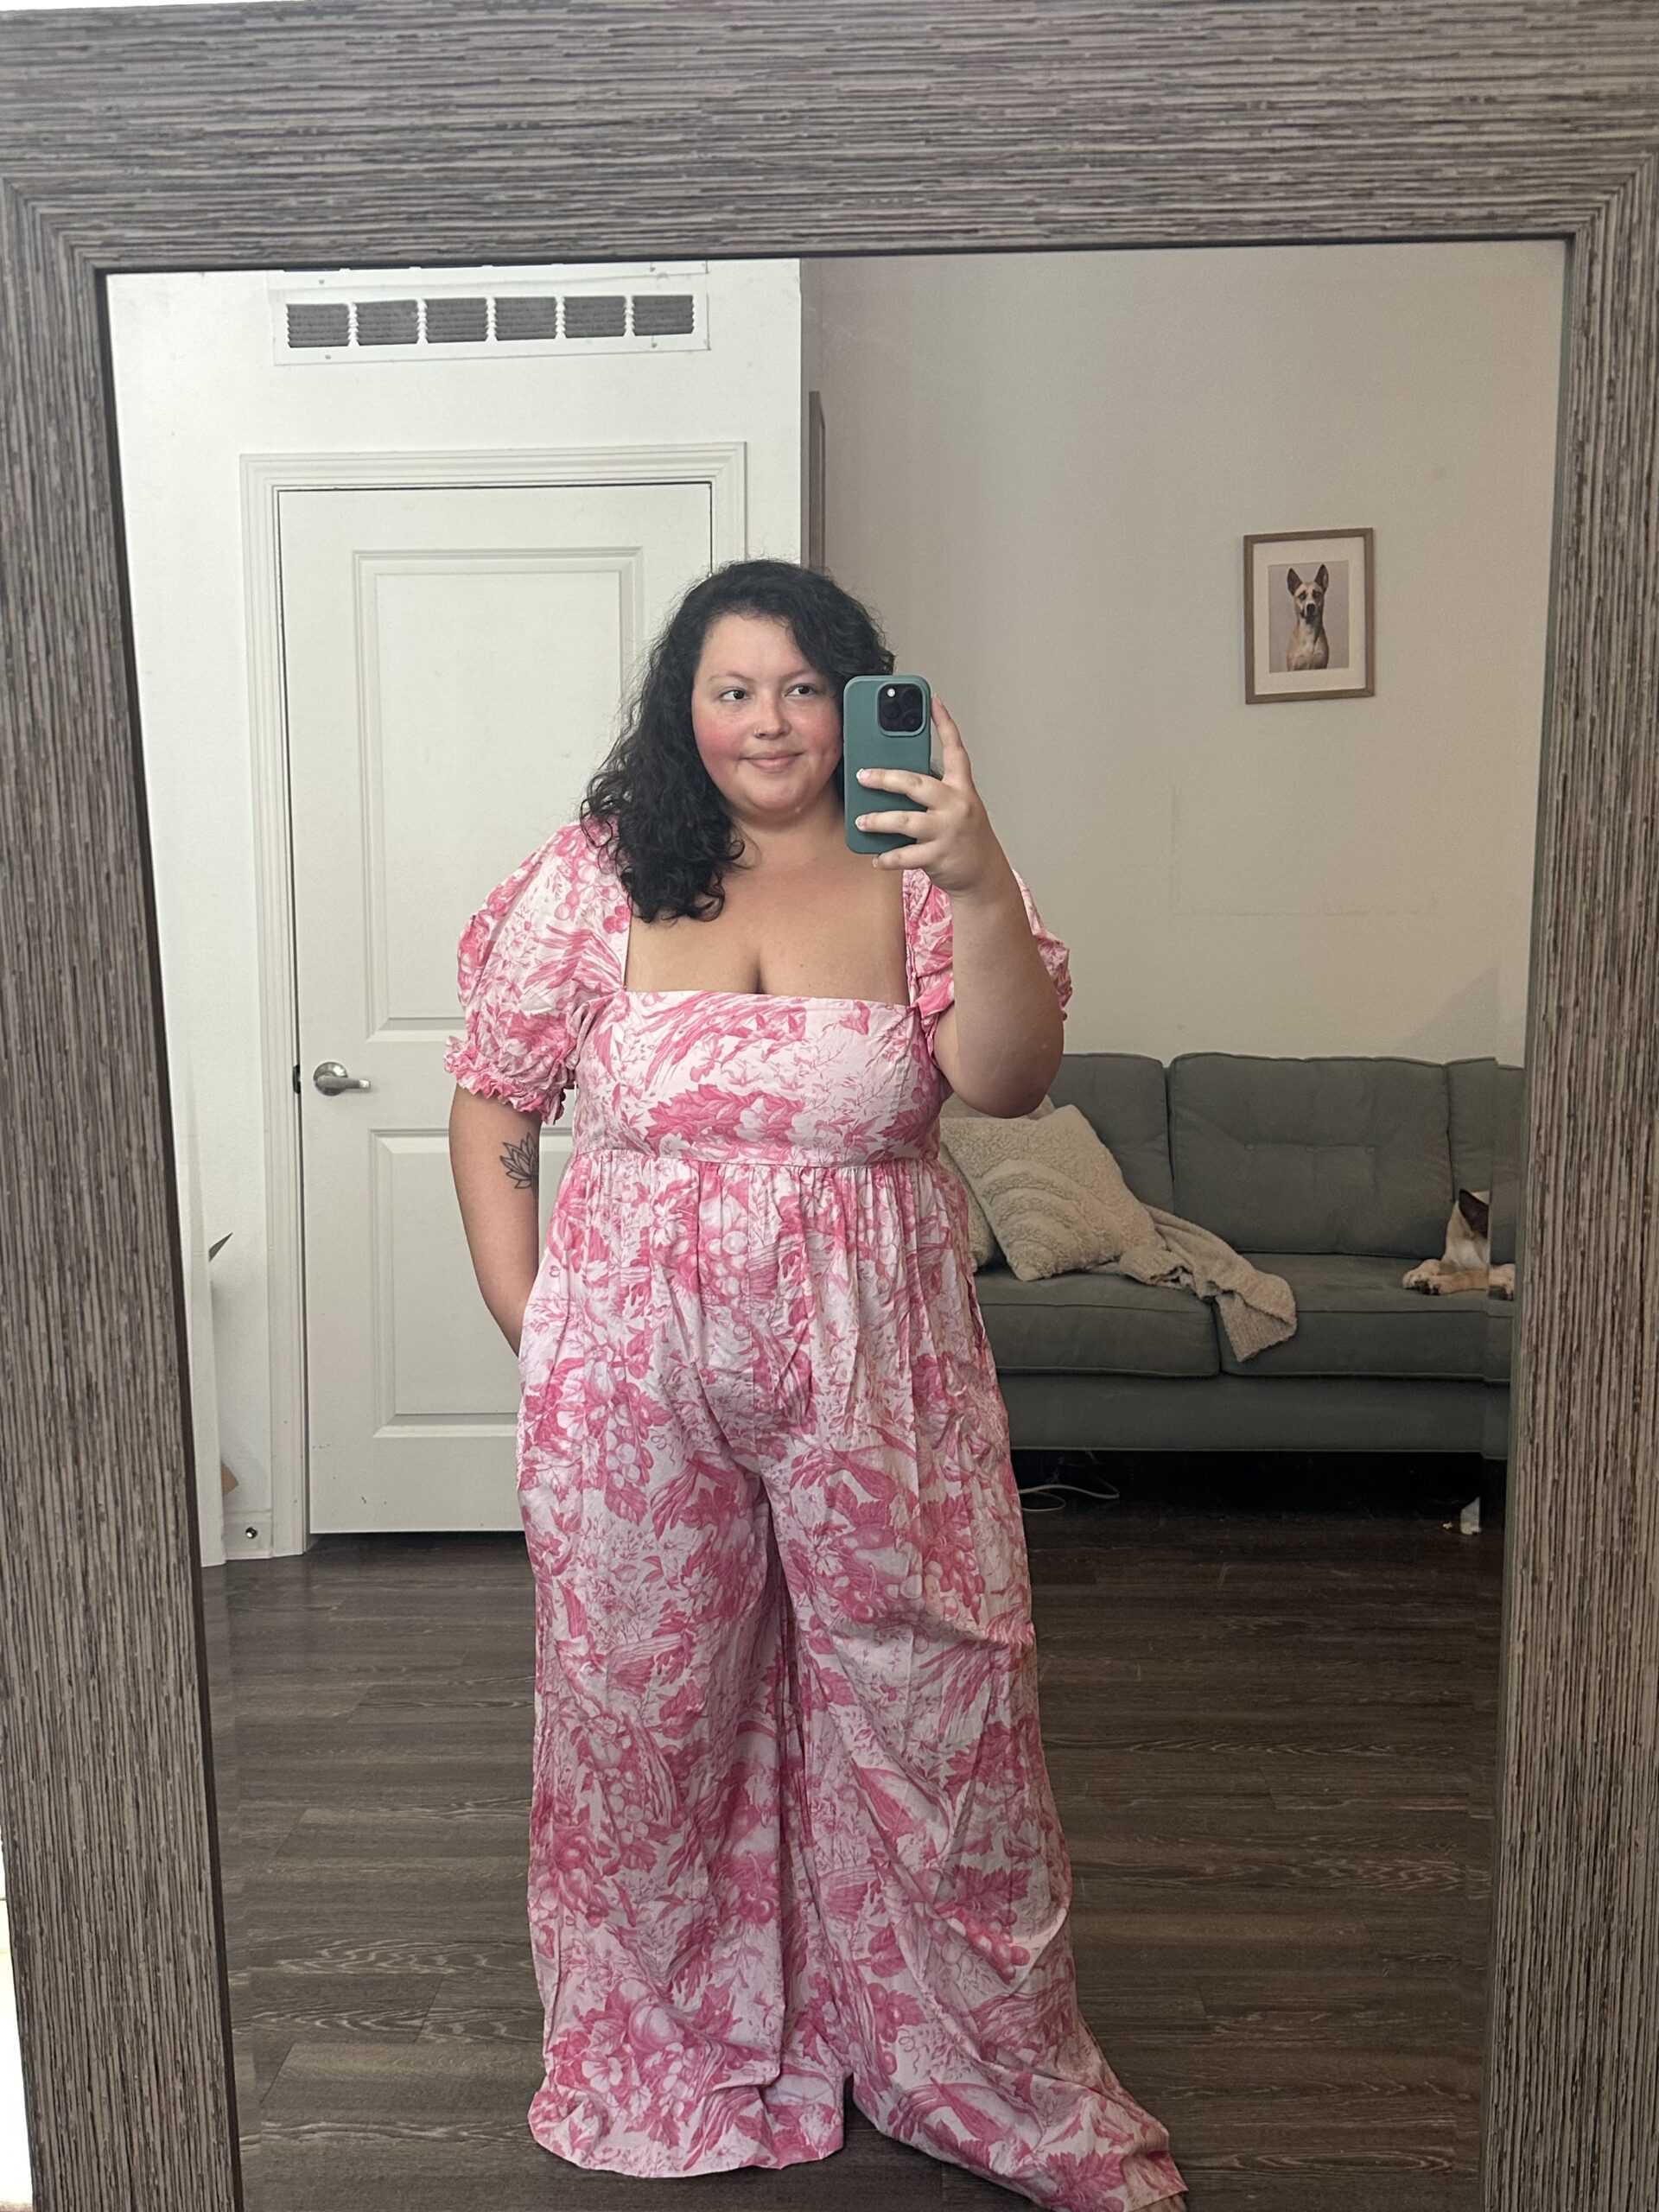 A woman in a pink floral dress takes a selfie in a mirror with a phone, with a living room visible in the background.